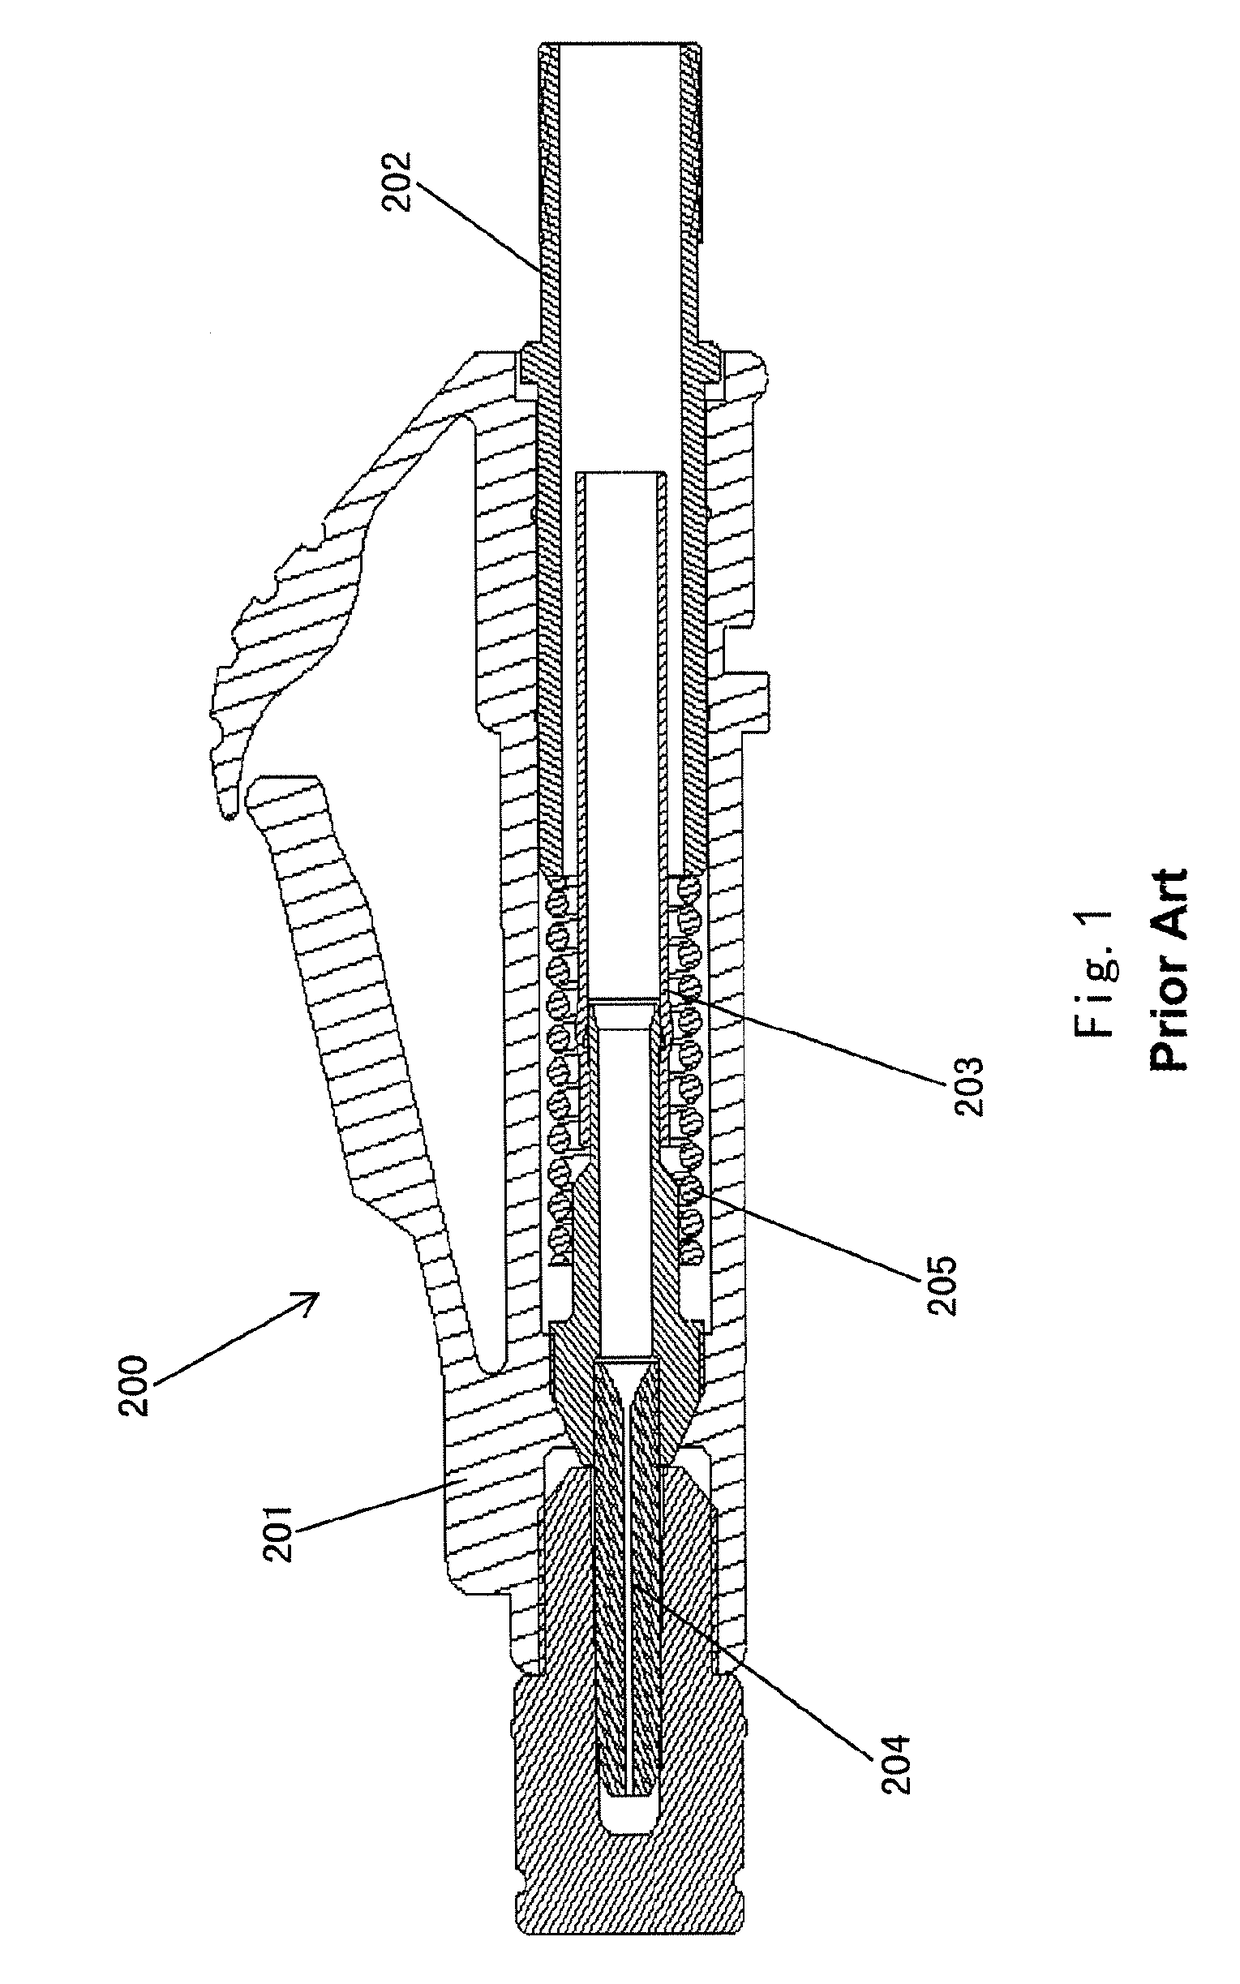 Fiber optic connector having radio frequency identficiation tag and optical fiber connection device